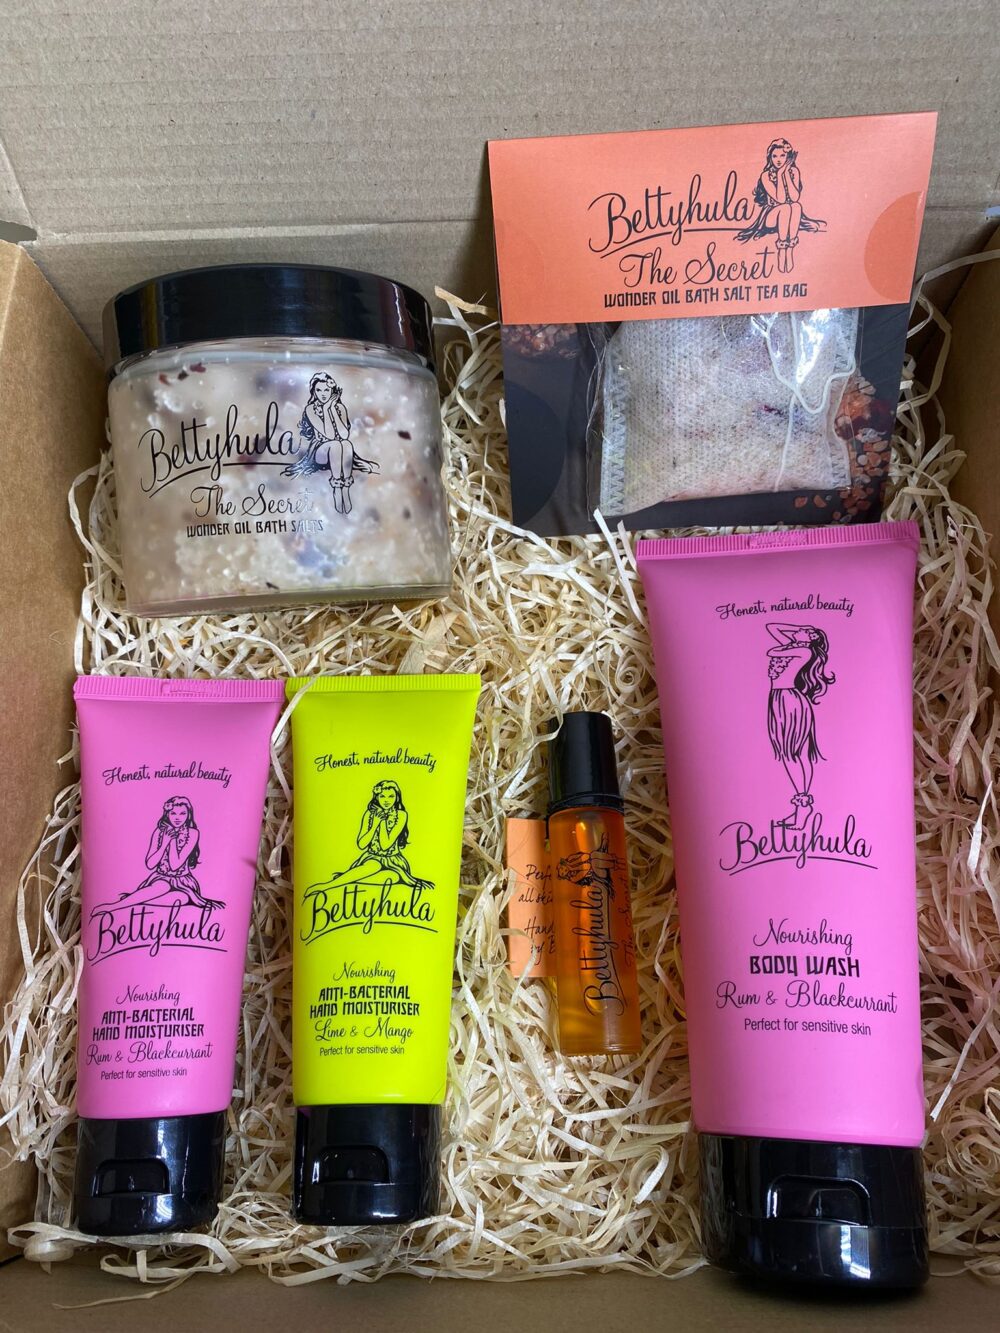 Hamper containing several Beauty Products from the brand Betty Hula